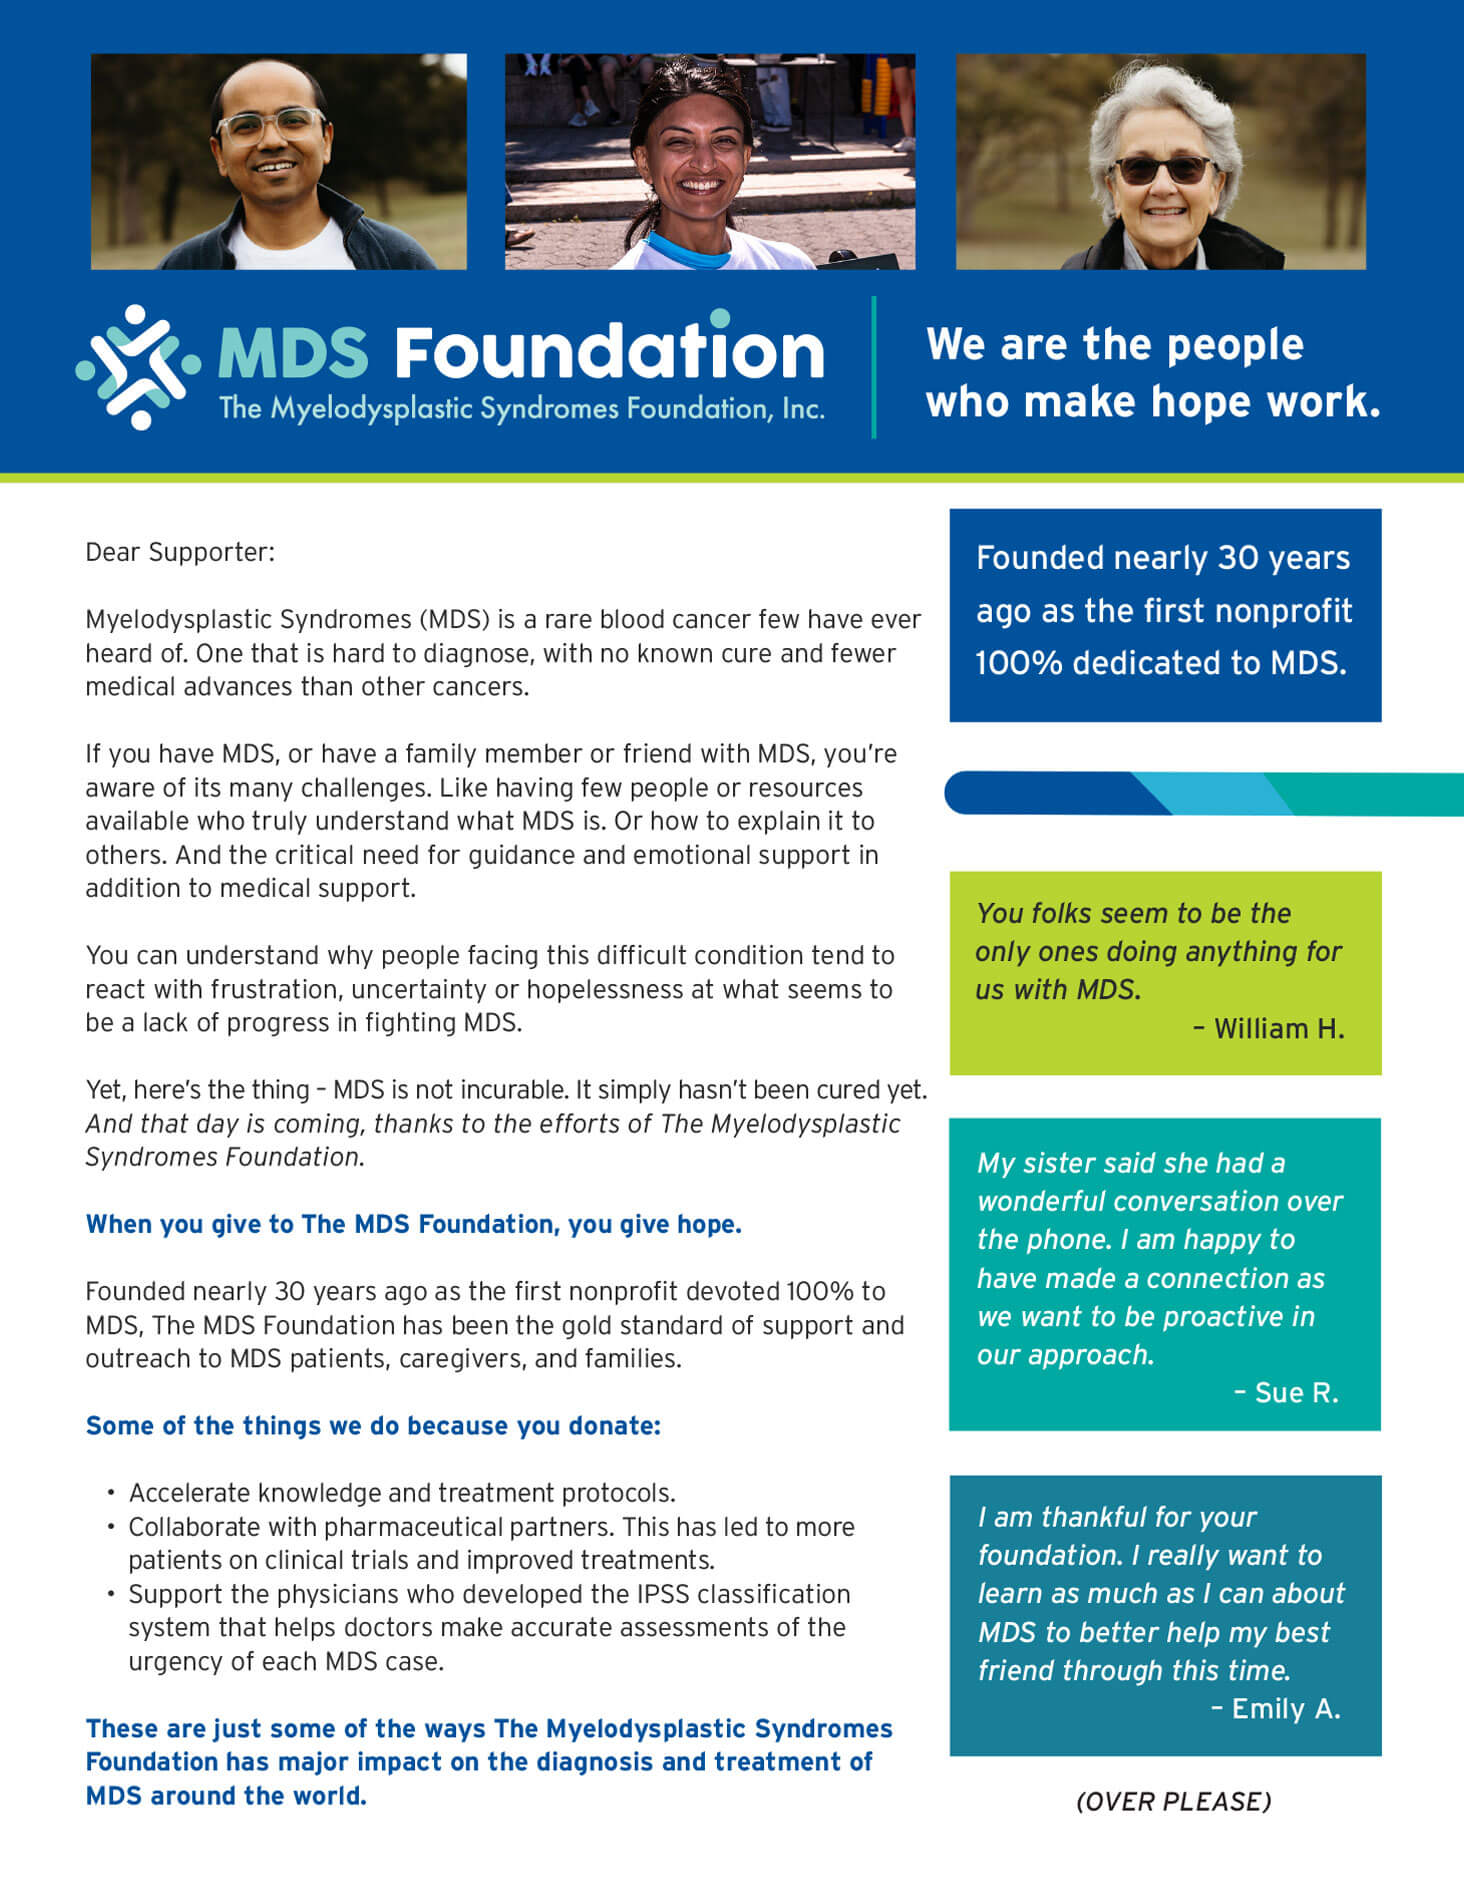 Myelodysplastic Syndromes Foundation_2-page-letter-front